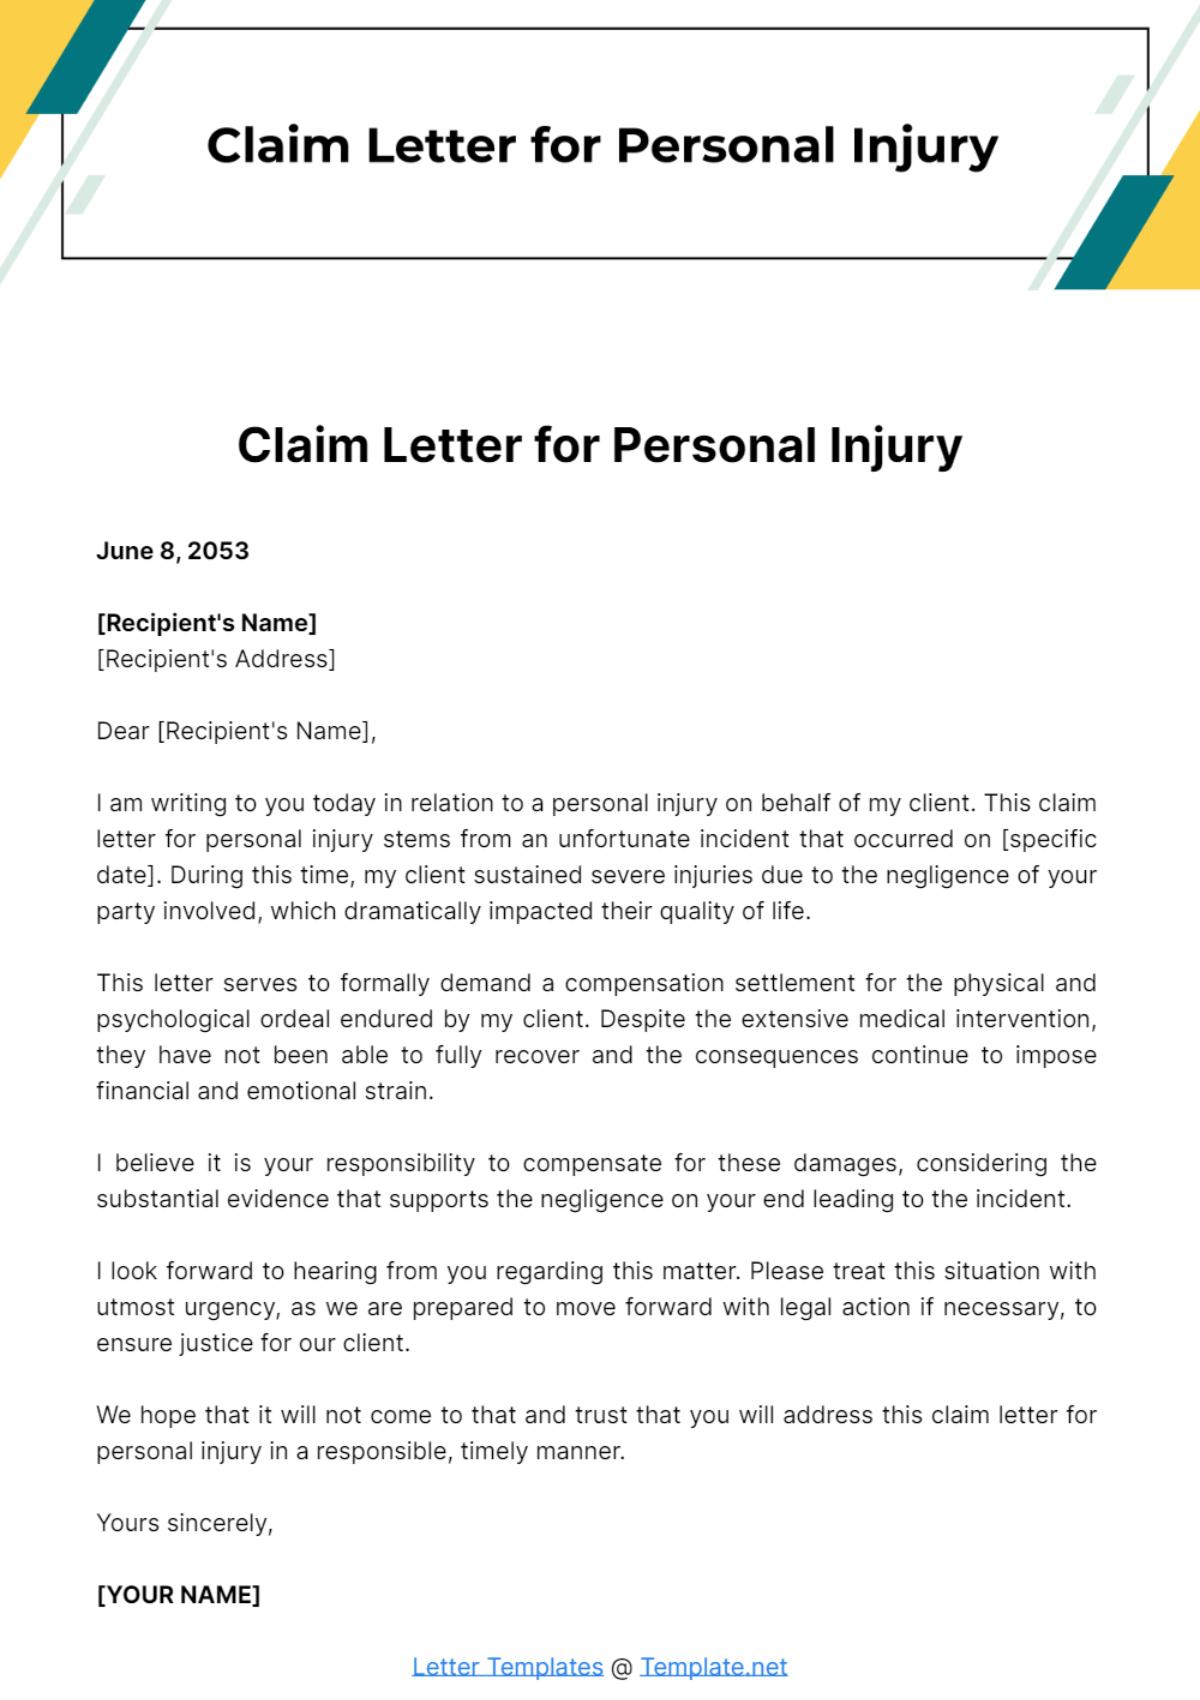 Free Claim Letter for Personal Injury Template